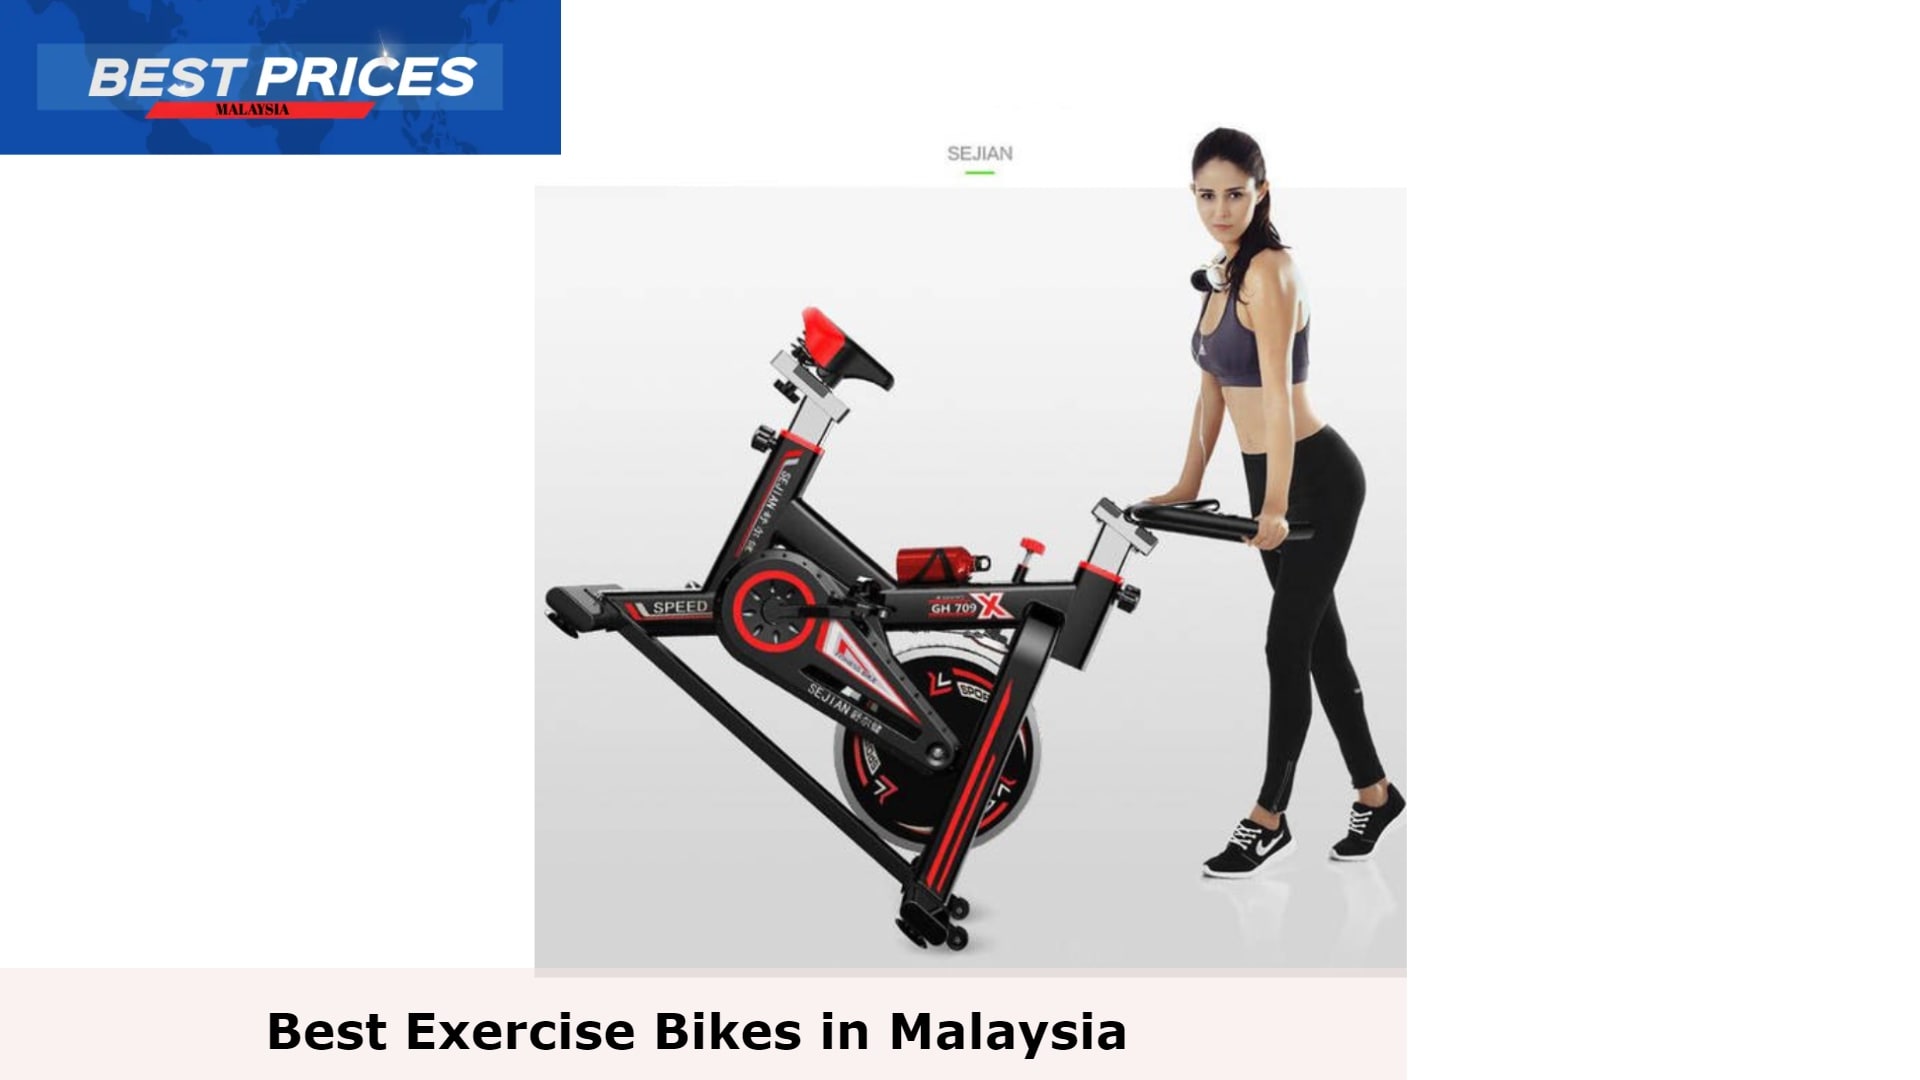 SEJIAN Luxury Home Gym Fitness Bike - Exercise Bike Malaysia, exercise bike Malaysia, exercise bike benefits, exercise bike Malaysia sale, aibi exercise bike, exercise bike malaysia price, exercise bike malaysia review, home gym exercise bike, exercise bike for elderly singapore, peloton exercise bike singapore, best exercise bike singapore, Which brand is best for exercise bike?, How much does a exercise bike cost?, Which cycle is best for exercise at home?, Is it worth buying a stationary bike?,